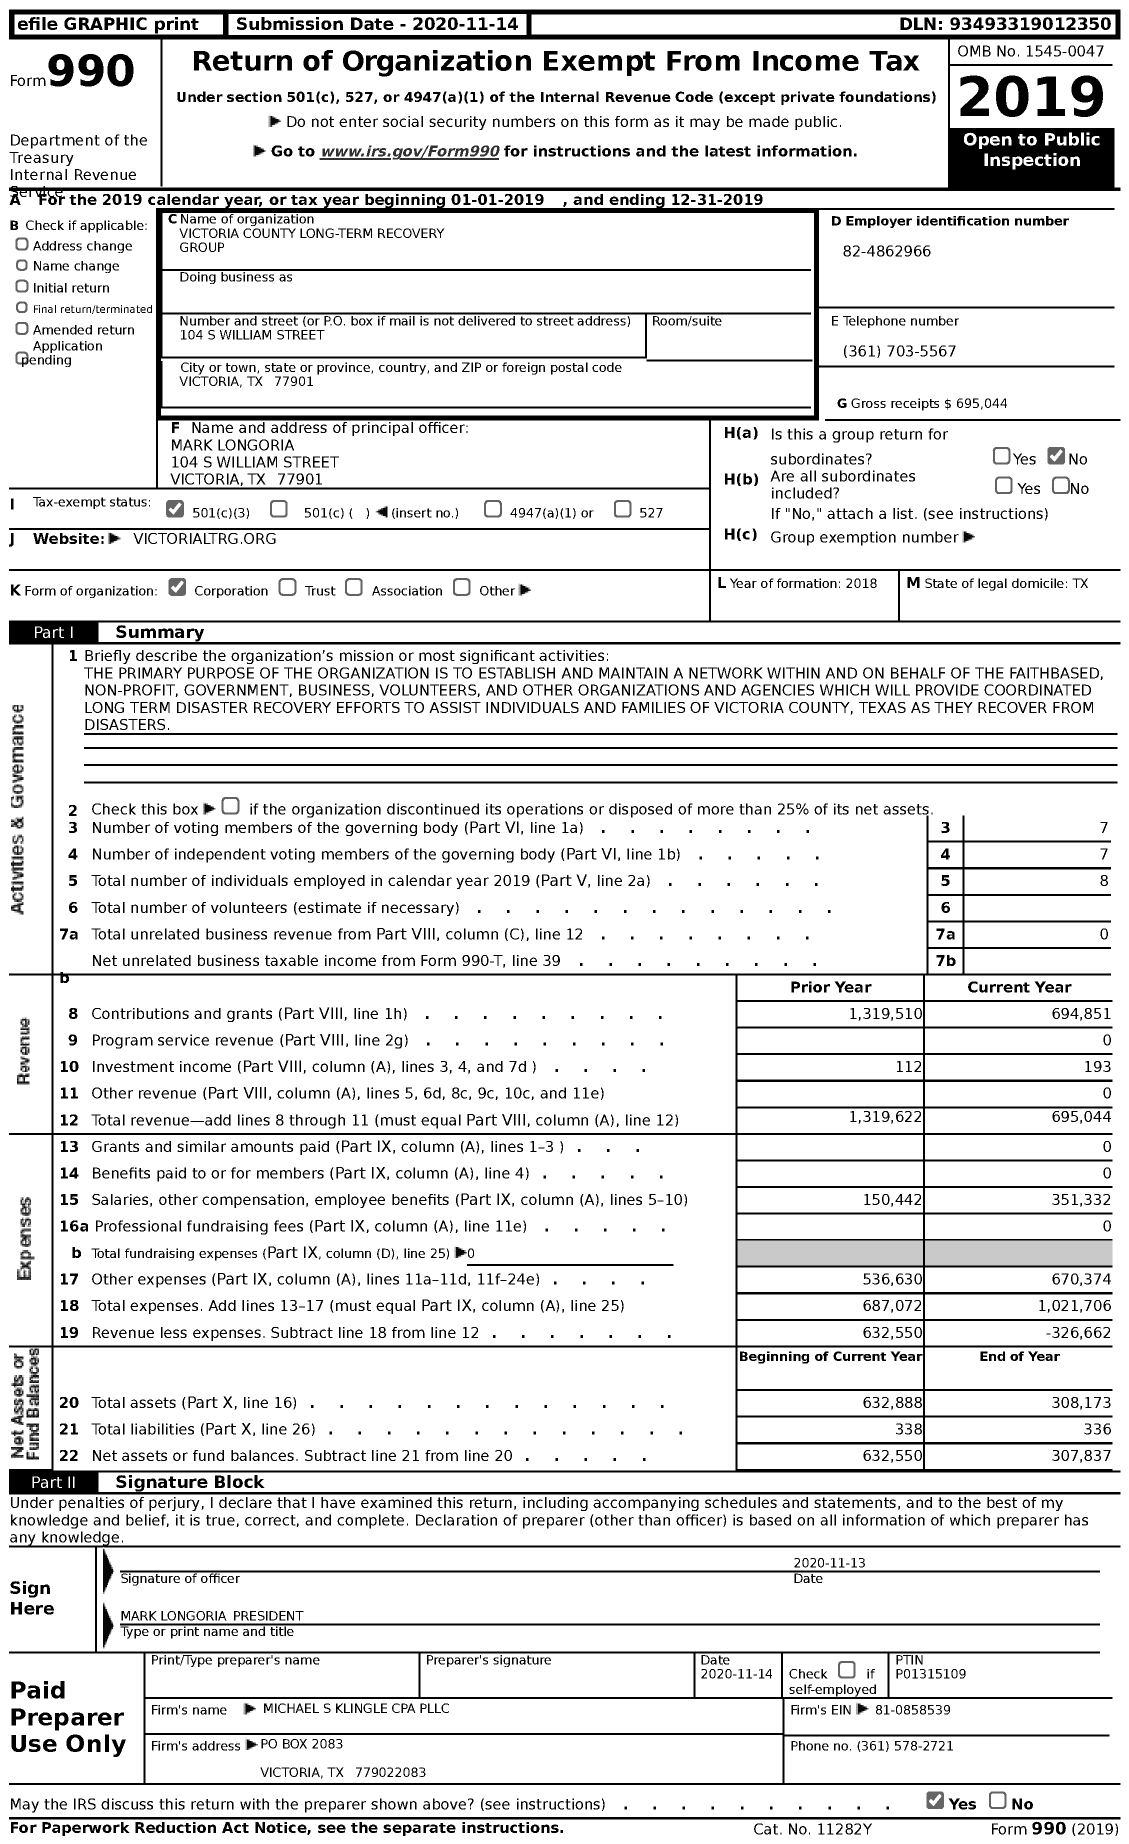 Image of first page of 2019 Form 990 for Victoria County Long-Term Recovery Group